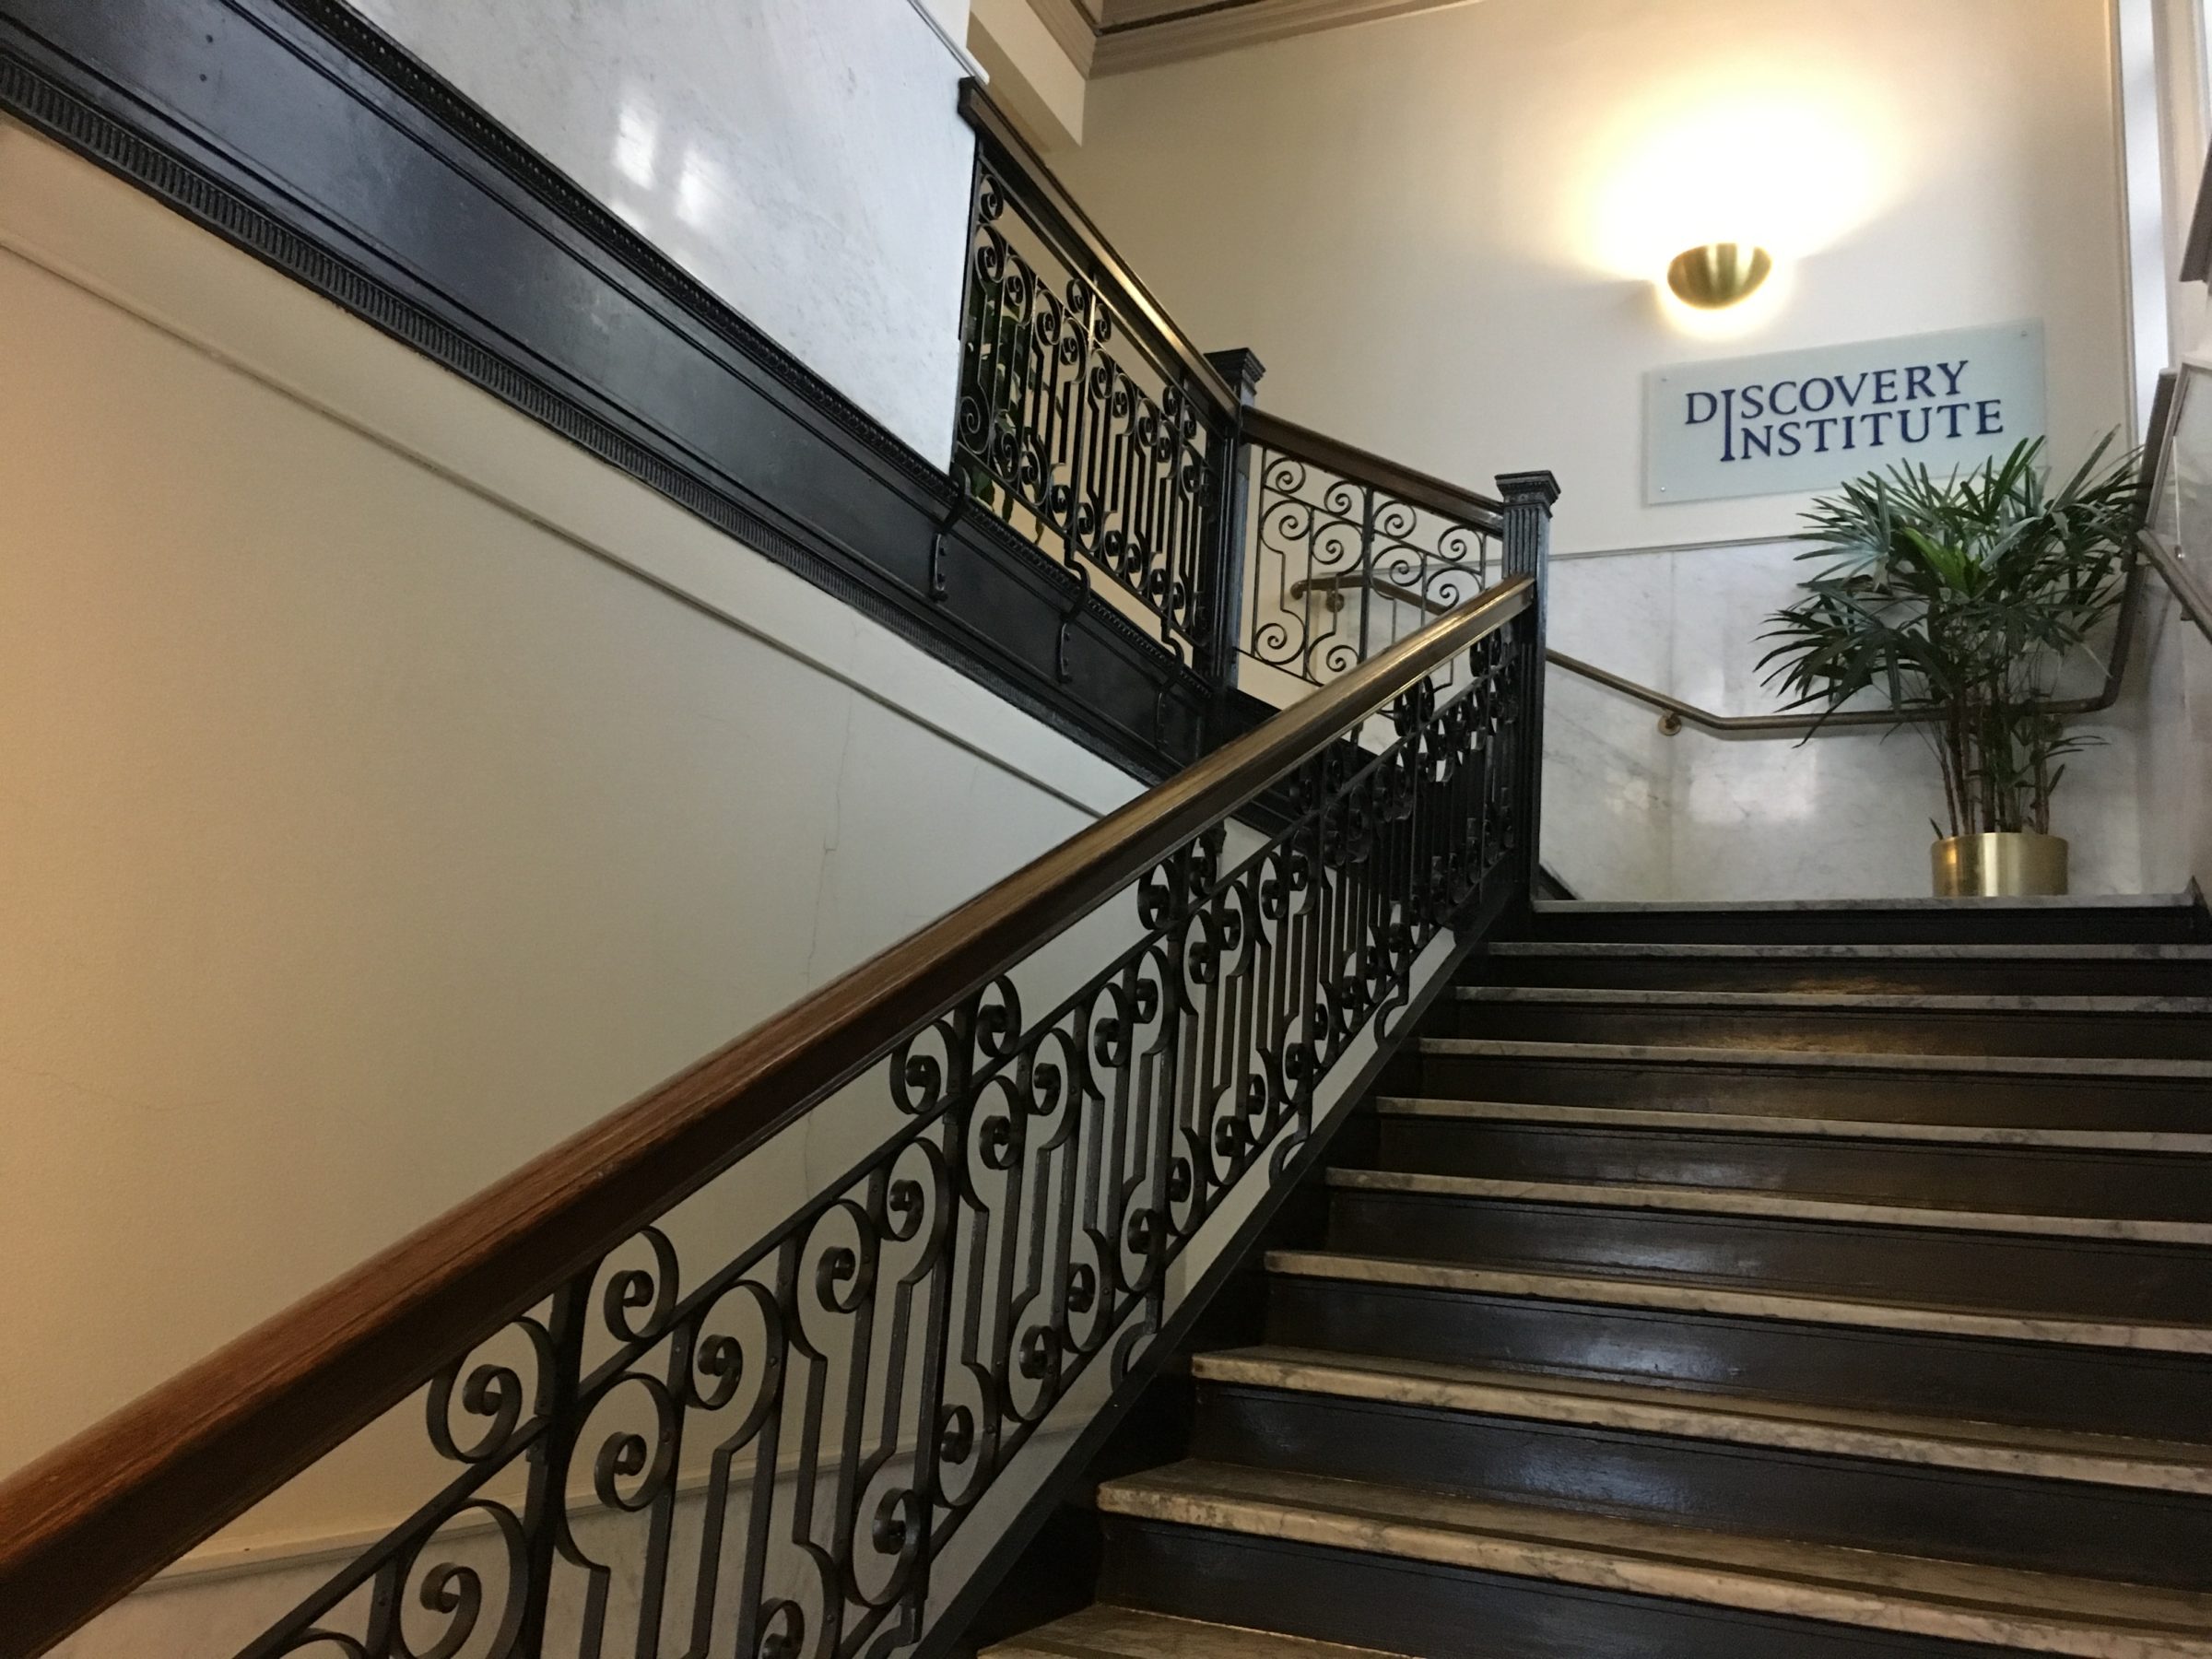 Discovery Institute office interior staircase